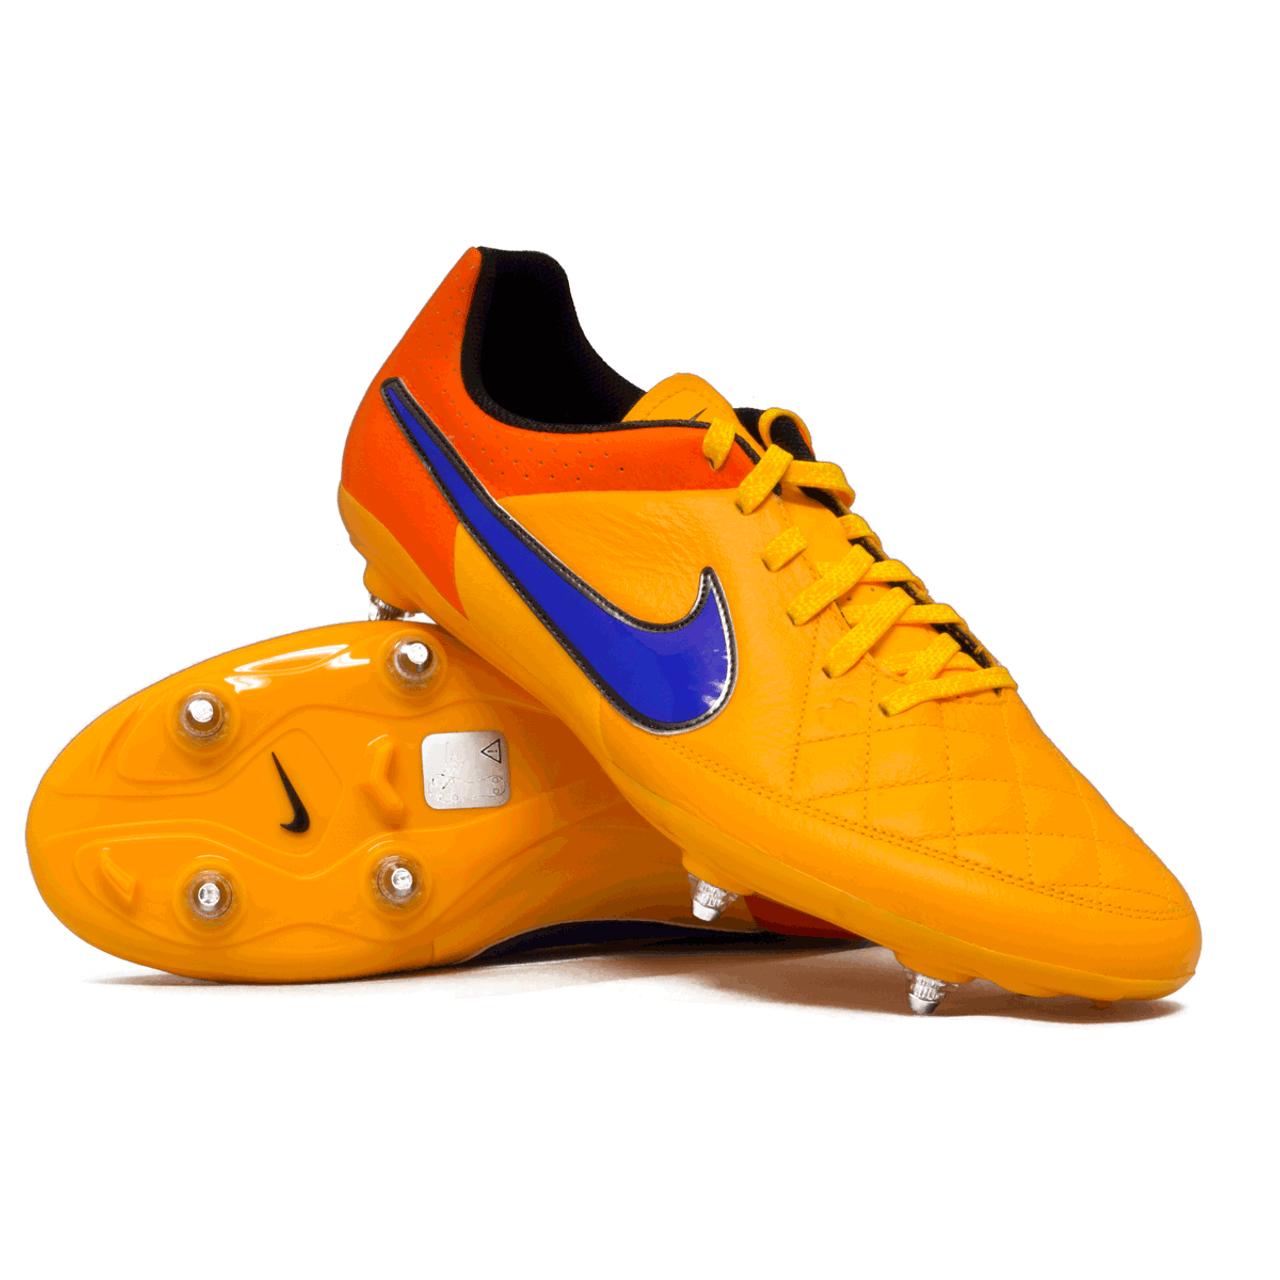 Nike Tiempo Genio Leather SG Boots on sale at Rugby City | 99.99